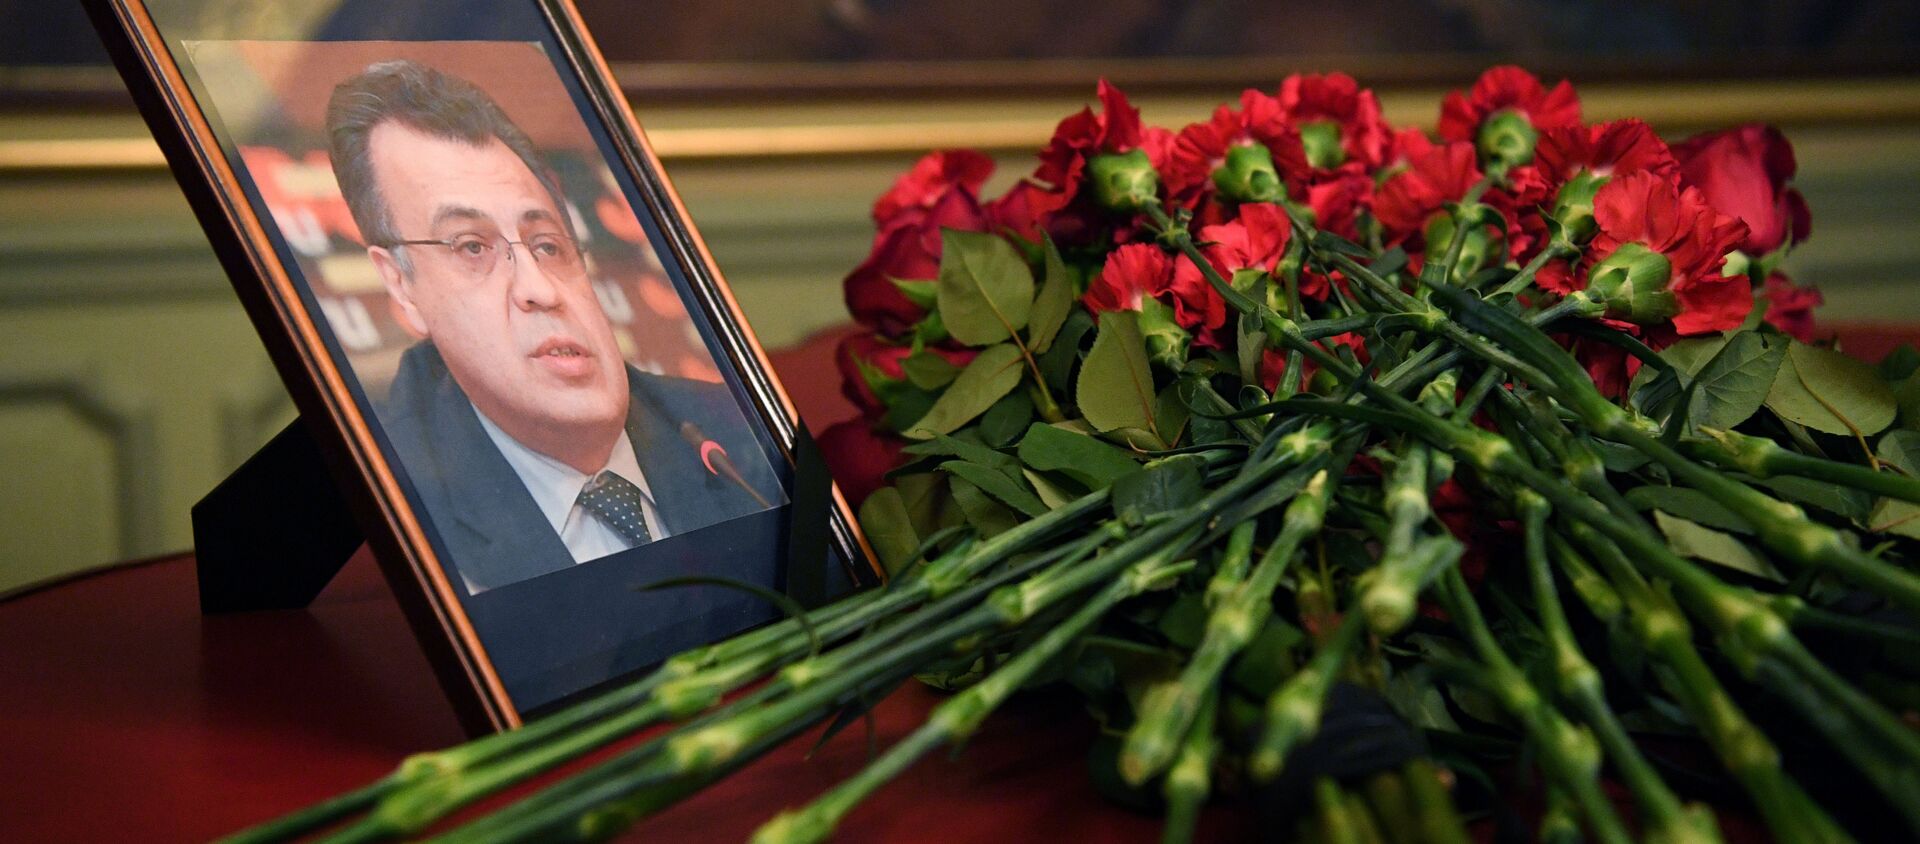 Flowers are placed in front of a portrait of Russian Ambassador to Turkey Andrei Karlov in the Foreign Ministry in Moscow a day after the assassination of the Russian ambassador in the Turkish capital - Sputnik International, 1920, 05.03.2020